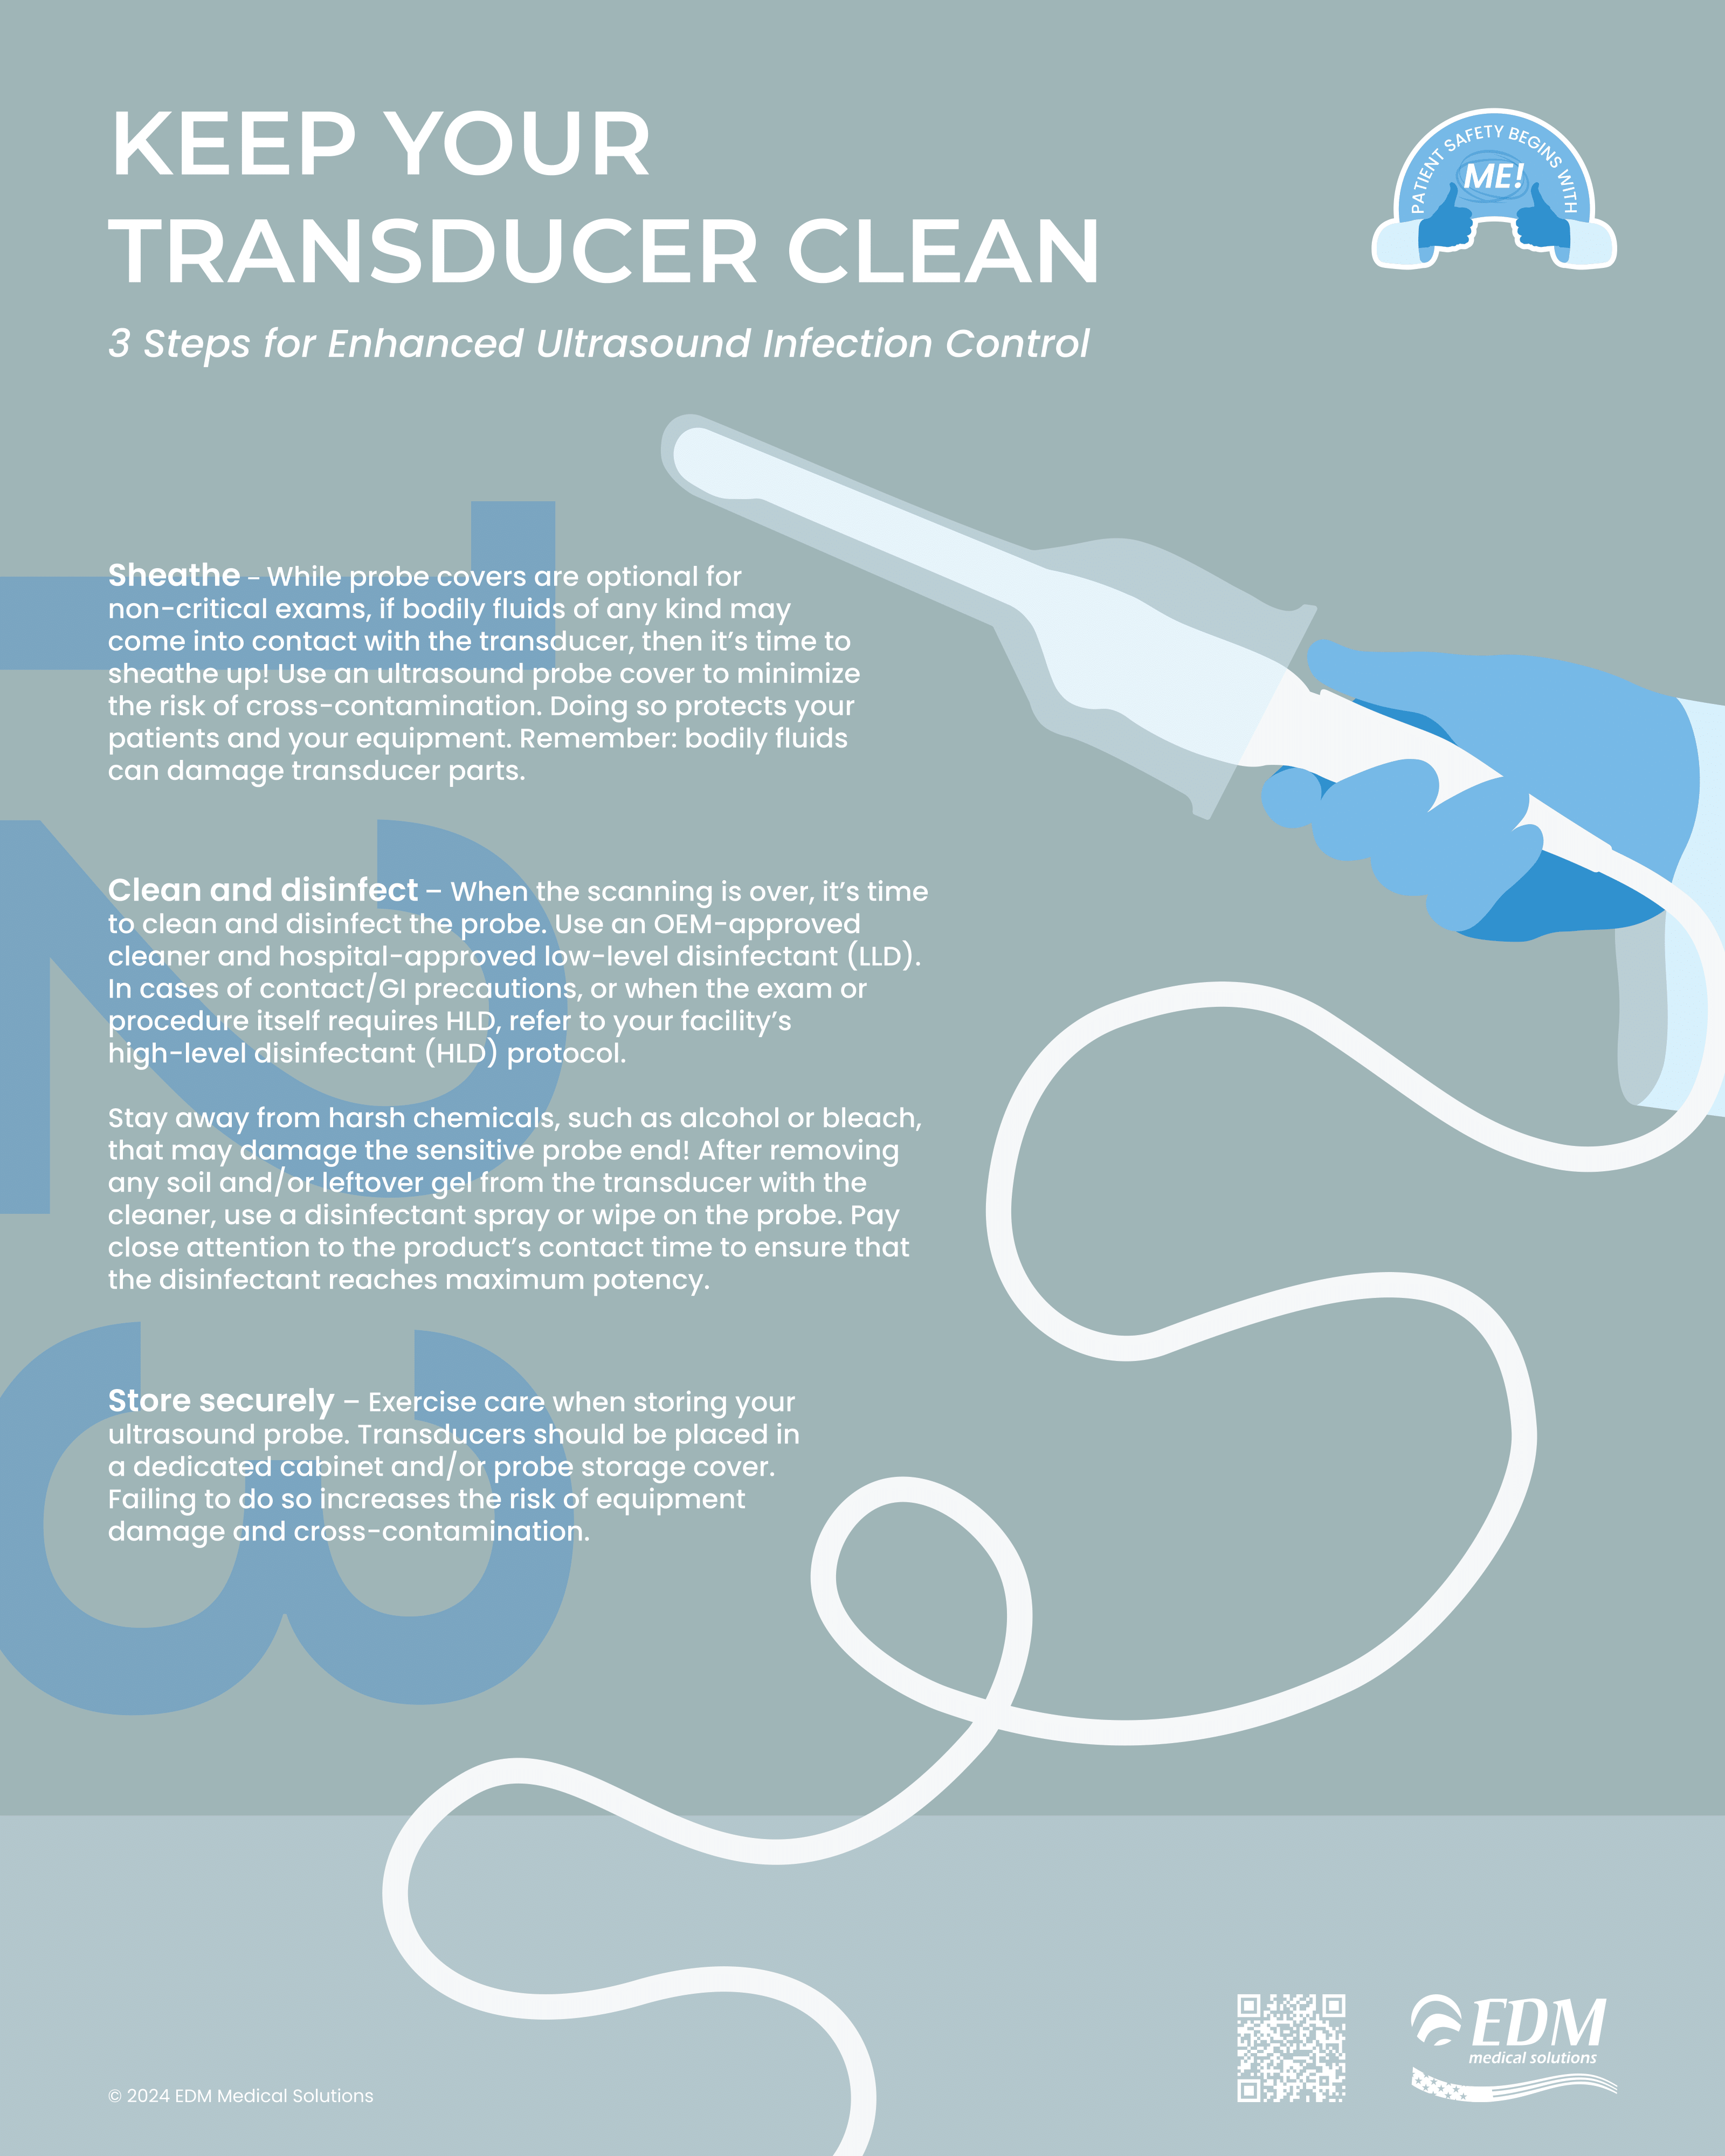 Keep Your Transducer Clean - Poster